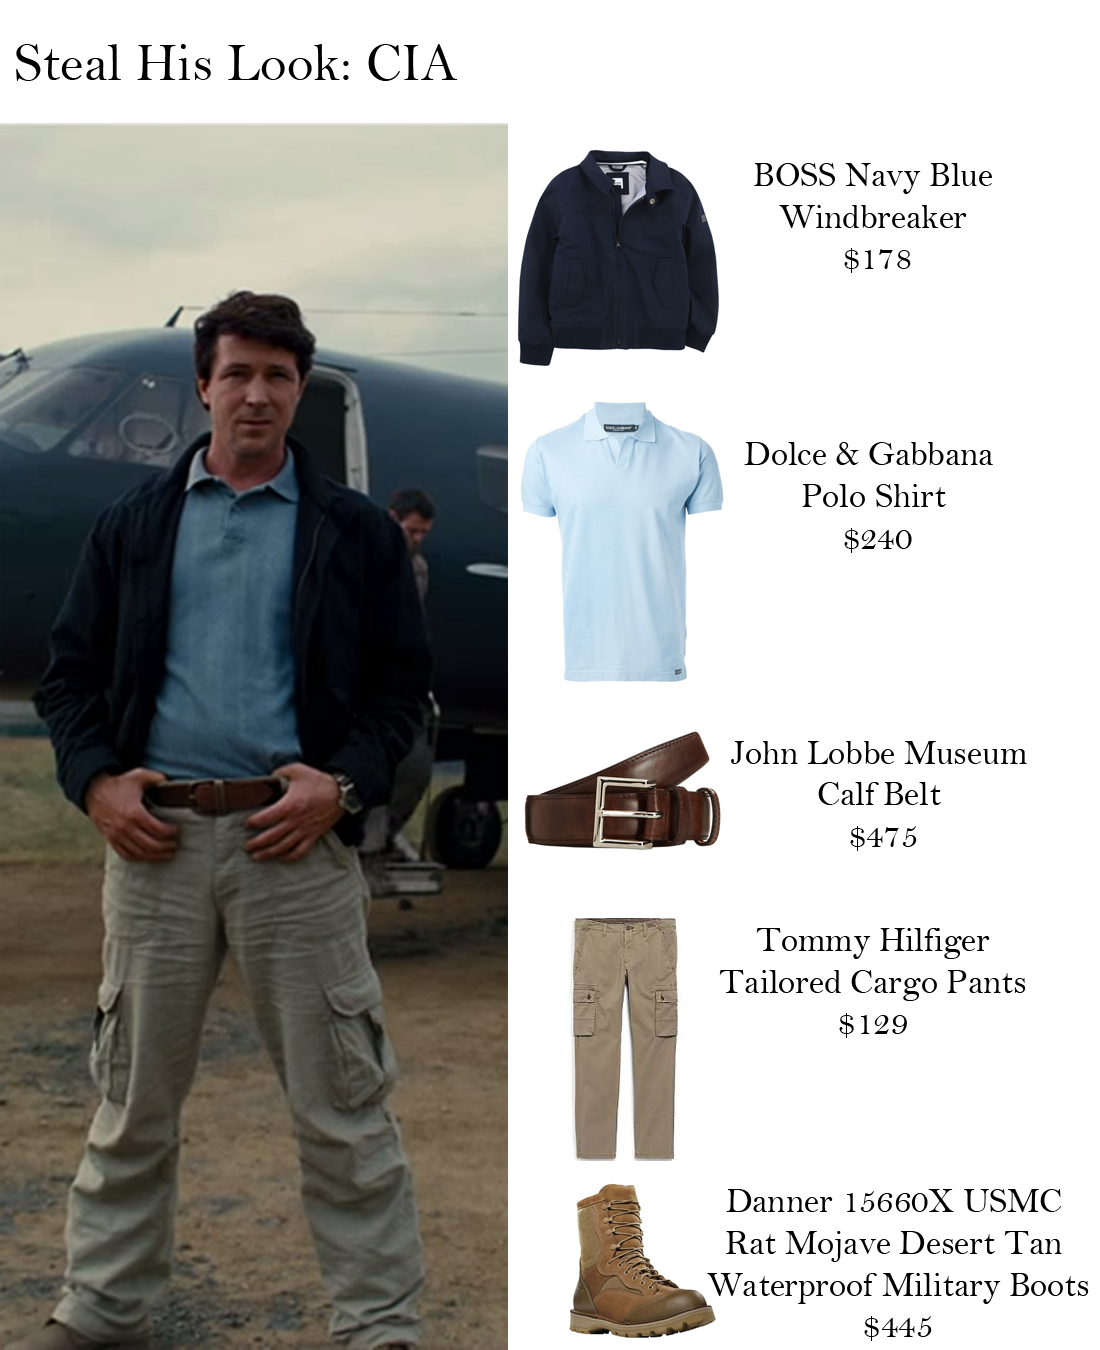 Steal his look CIA